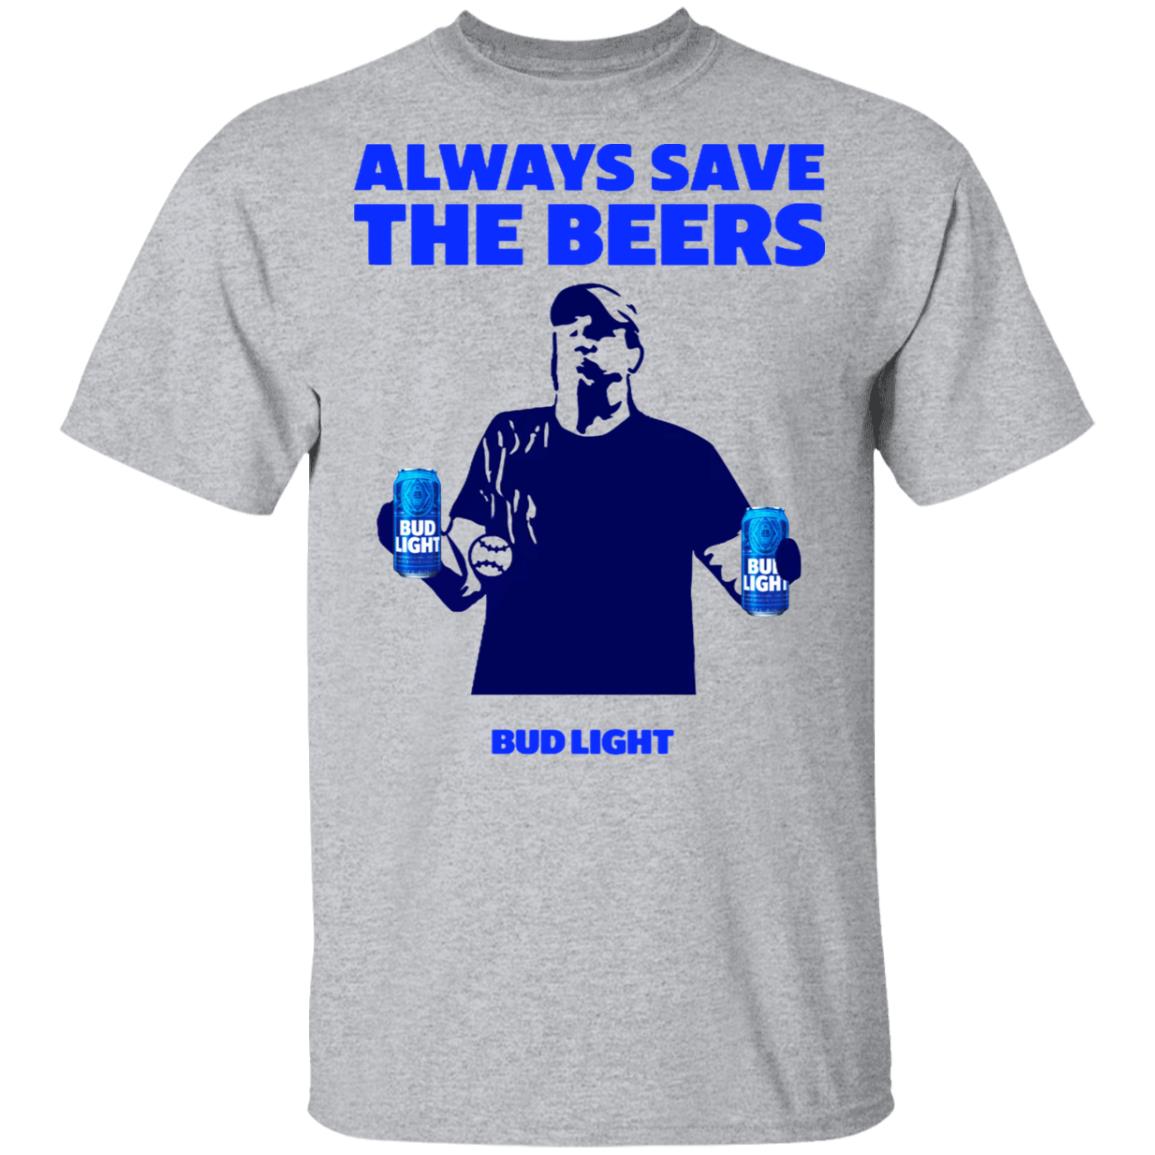 bud light always save the beers shirt